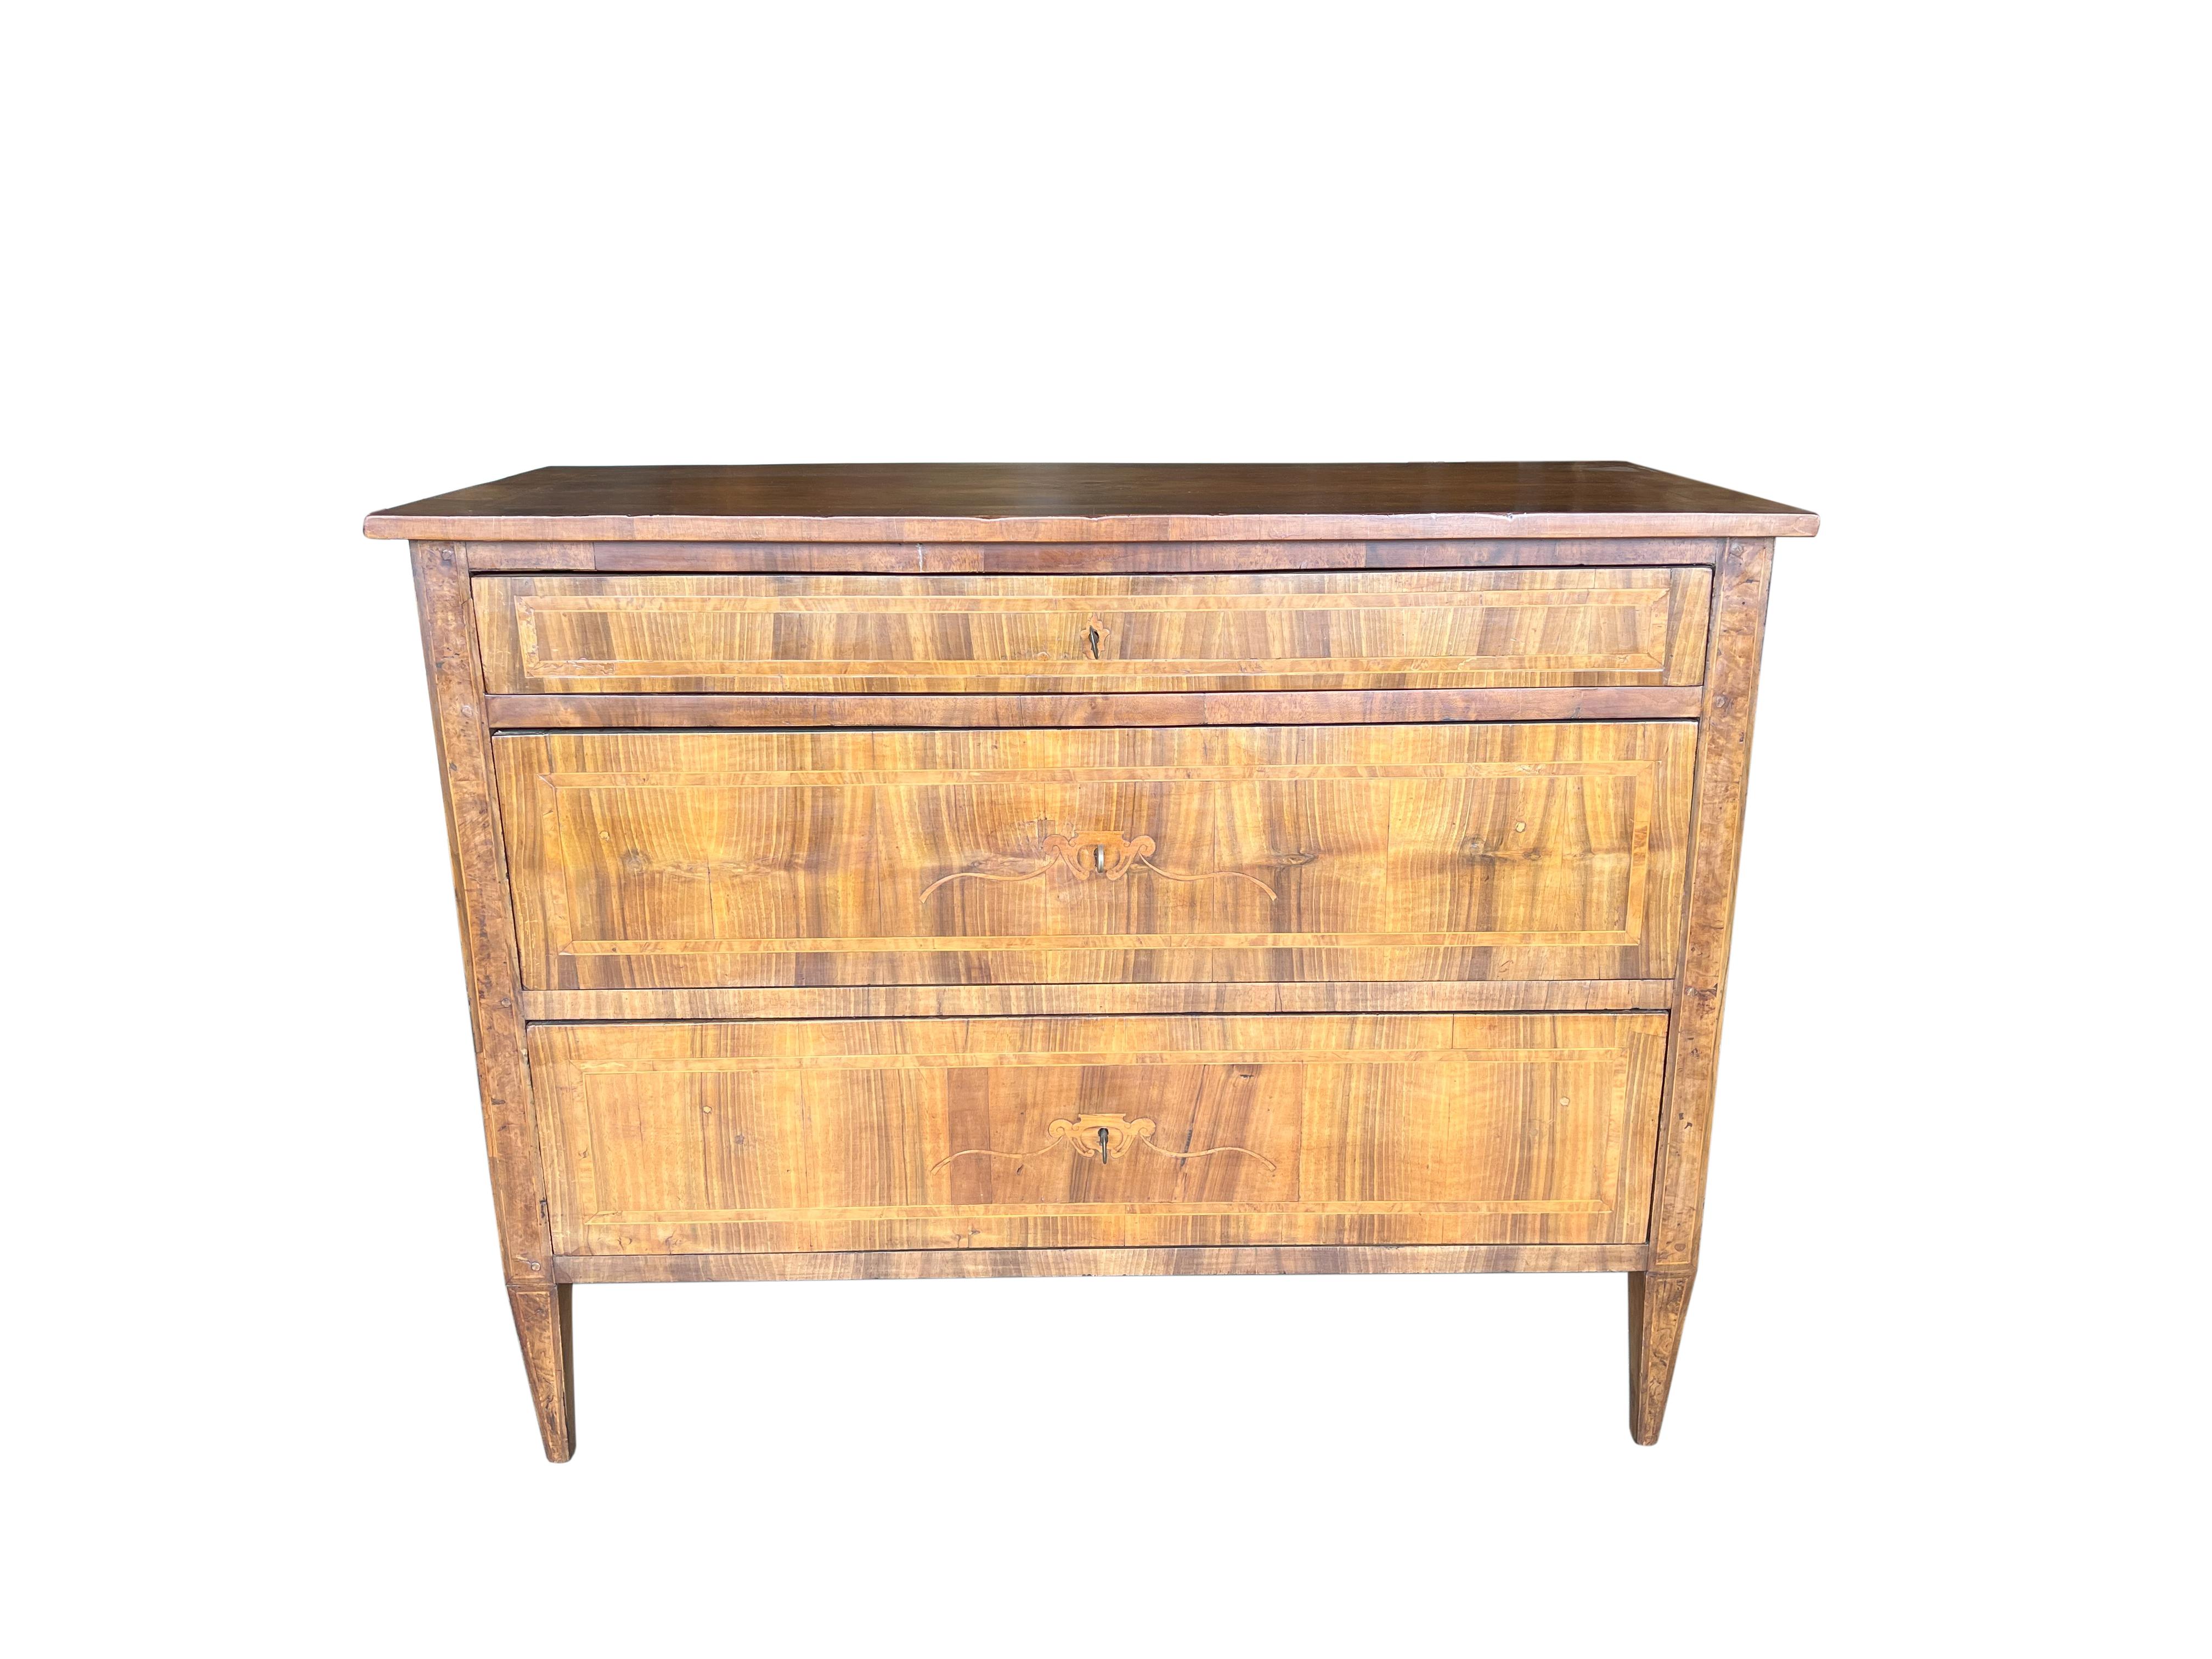 Elegant Louis XVI Style Italian walnut chest of drawers with burl inlay, Tuscany circa 1890. Three drawers with dovetail joinery, separate locks & keys. Fine arts & crafts detail exhibited in a trim, modern form. Trophy floral marquetry centerpiece